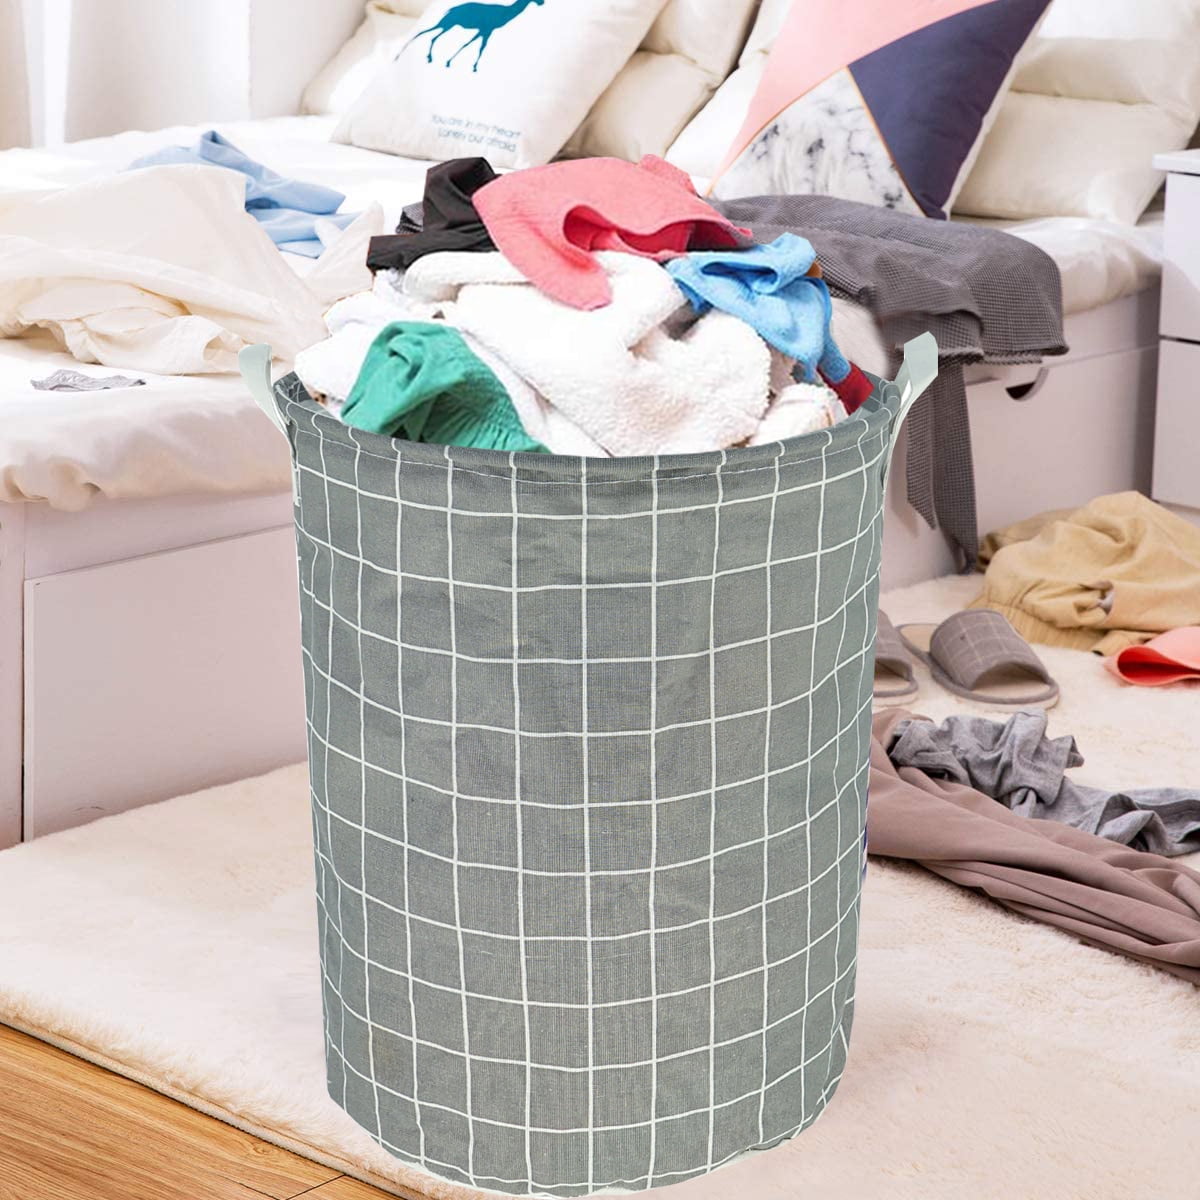 LARGE COLLAPSIBLE LAUNDRY BASKET WASHING CLOTHES BIN FOLDABLE SPACE SAVING NEW 